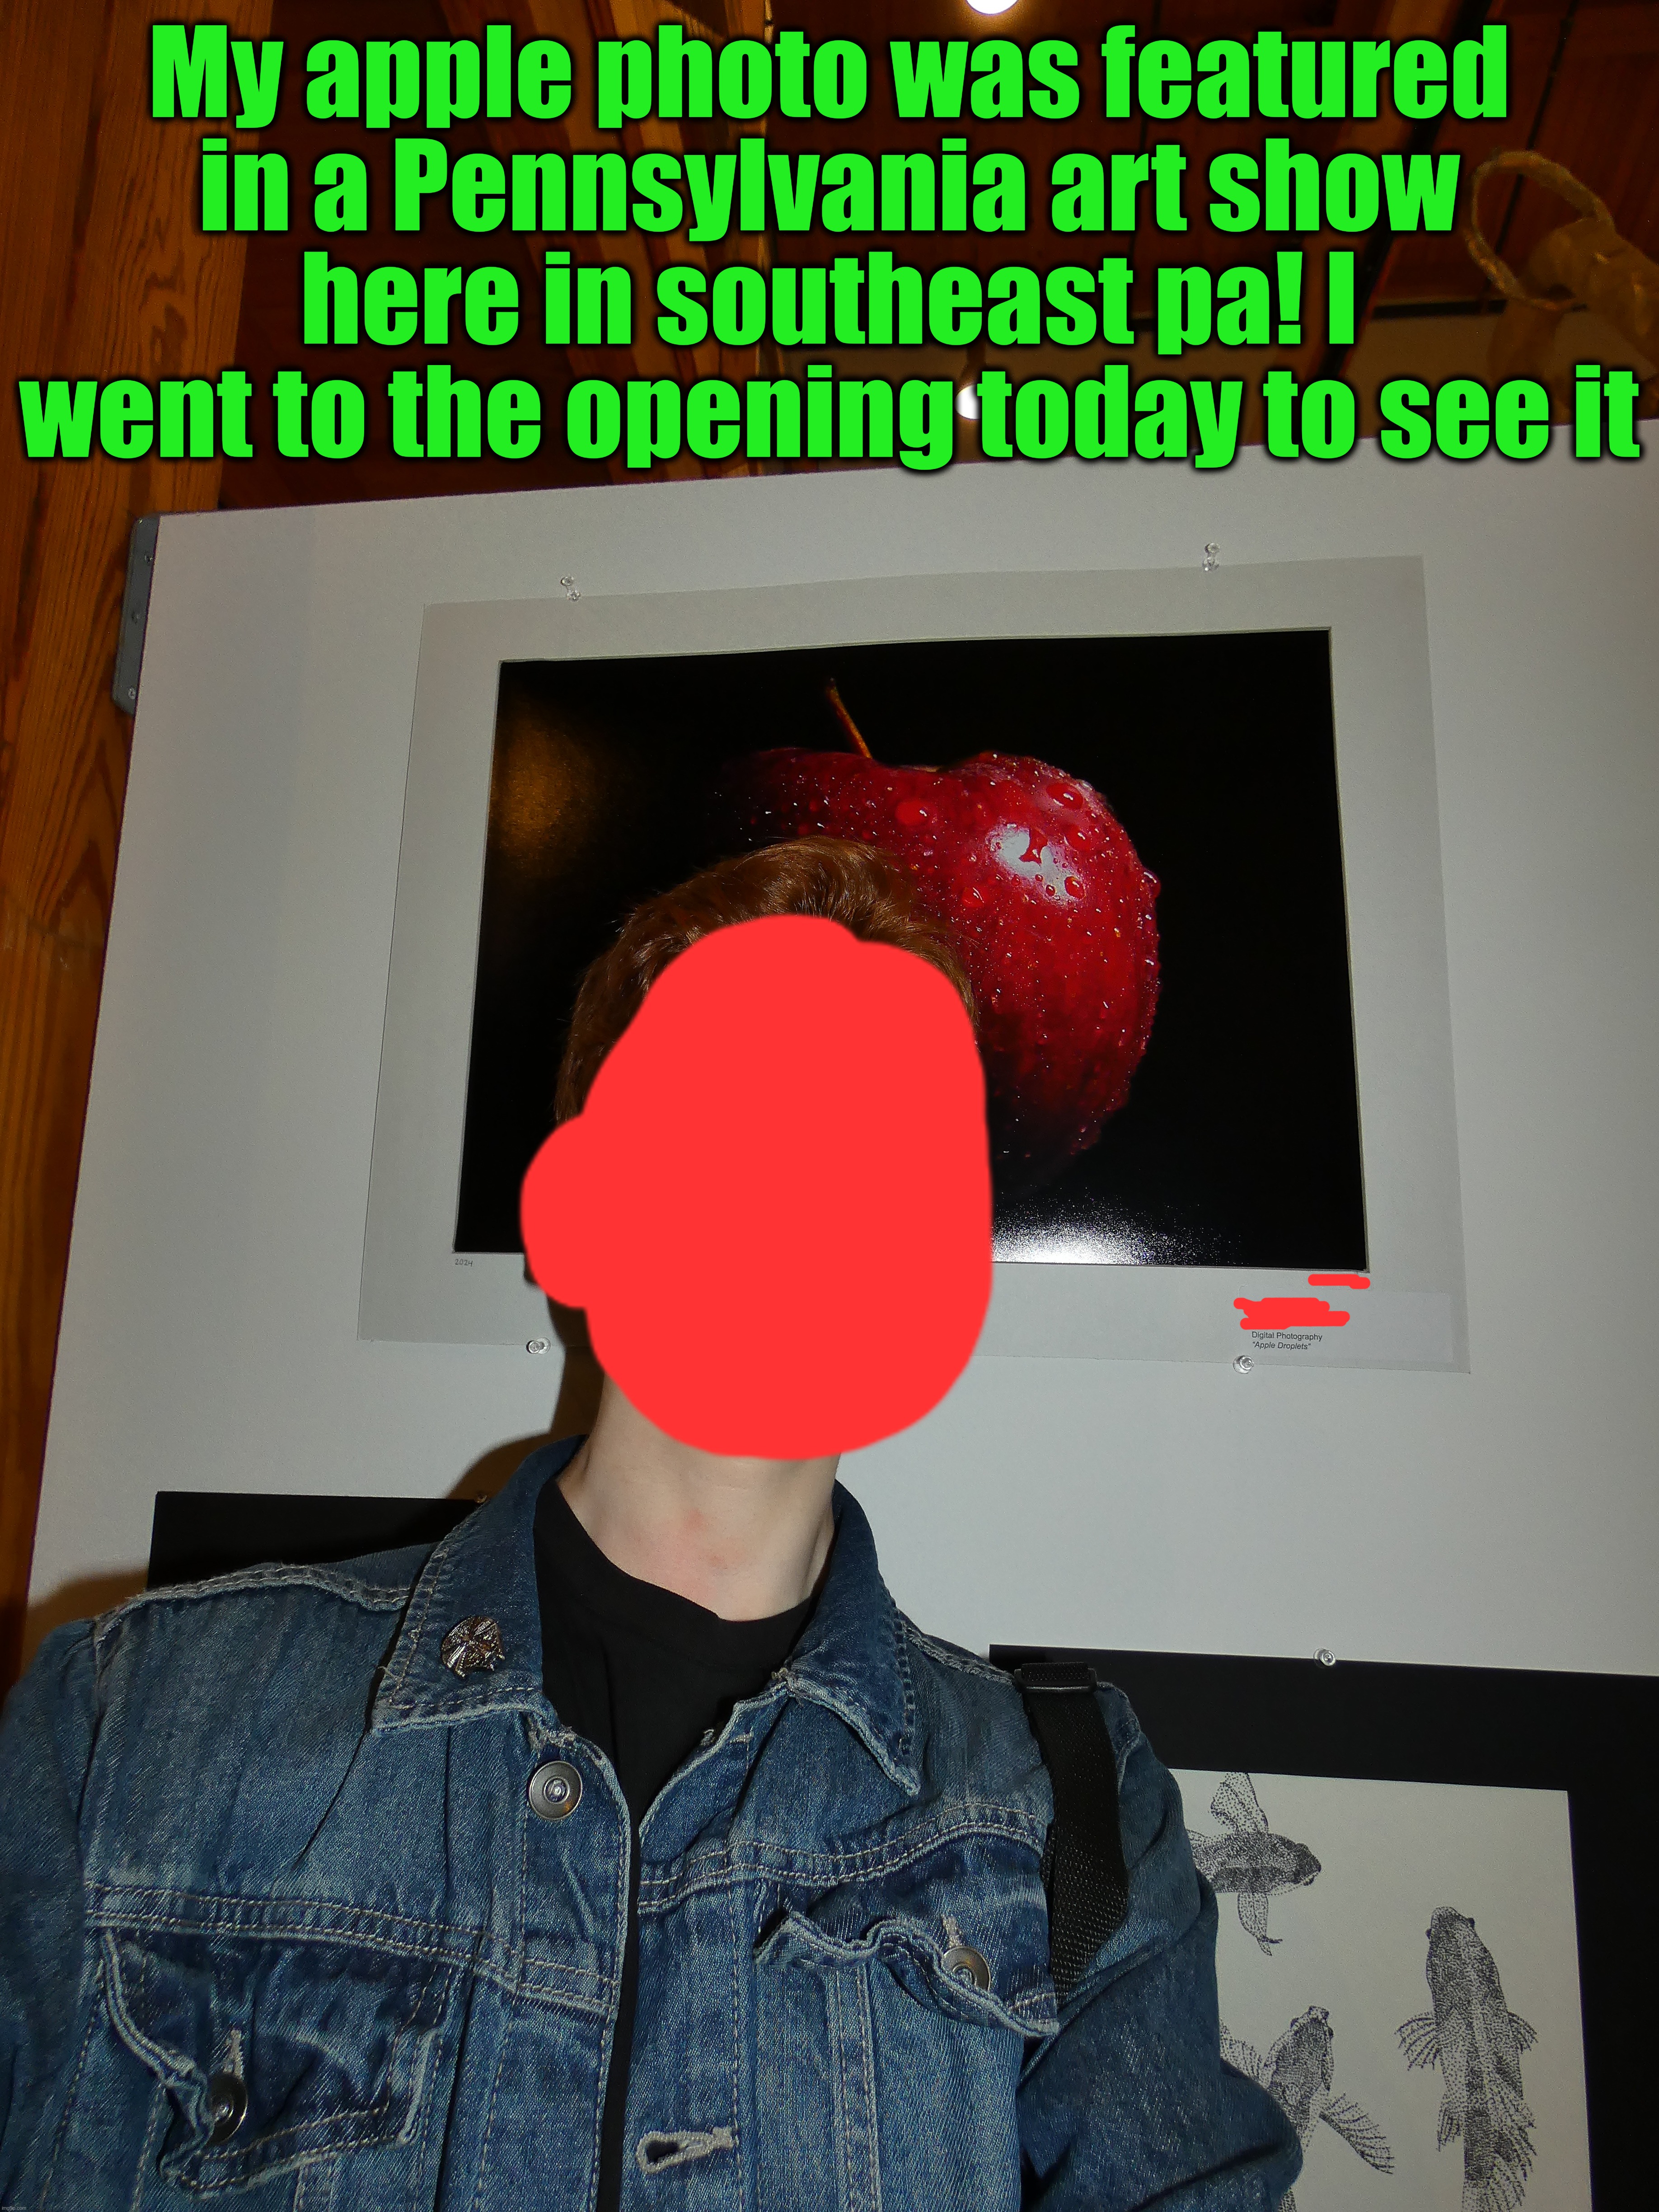 Closest you'll get to a face reveal | My apple photo was featured in a Pennsylvania art show here in southeast pa! I went to the opening today to see it | image tagged in share your own photos,art,art show,photography | made w/ Imgflip meme maker